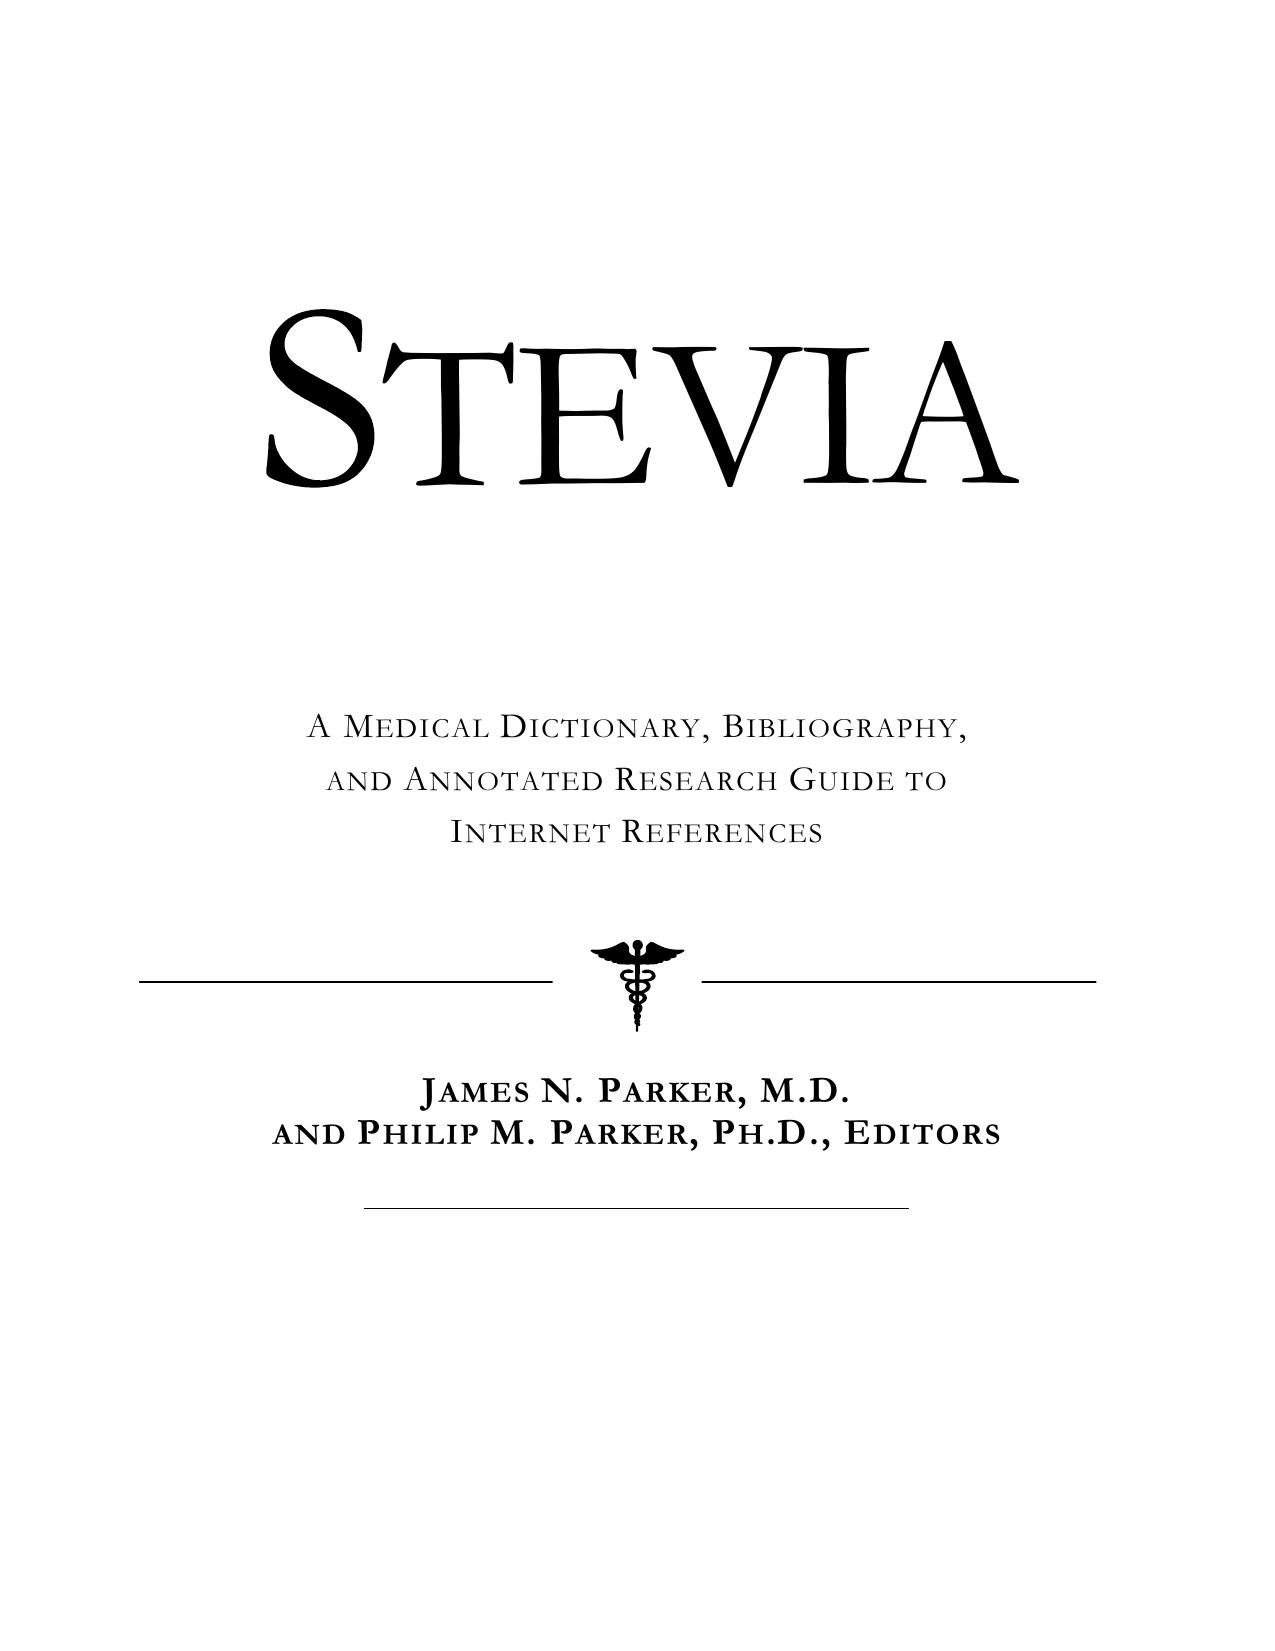 Stevia - A Medical Dictionary, Bibliography, and Annotated Research Guide to Internet References